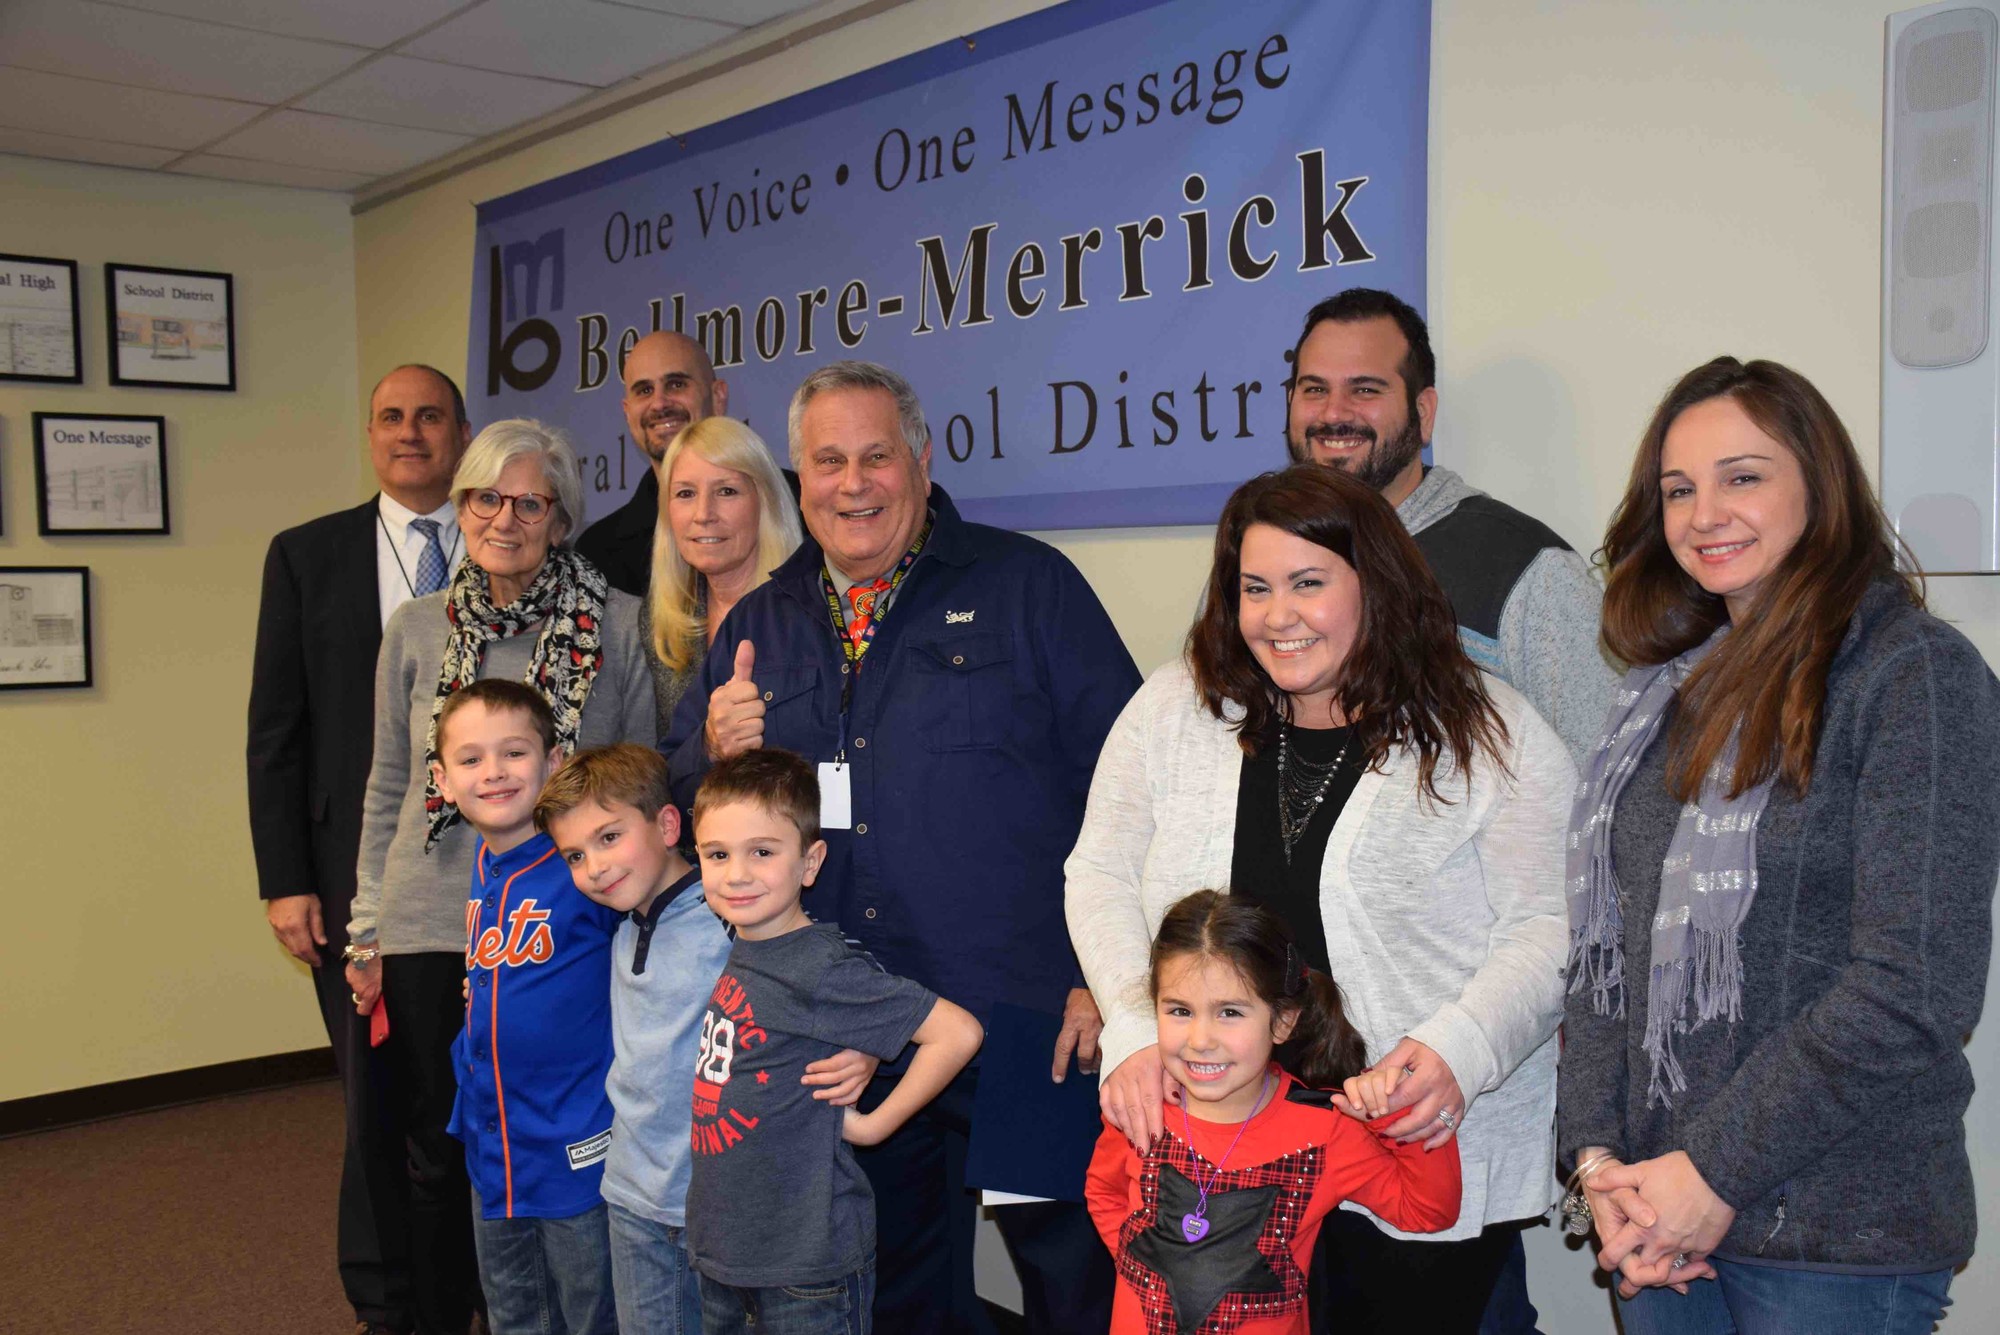 Steve Rose, center, founder of the Bellmore-Merrick Family Project, was honored at the March 2 Central District Board of Education meeting. Joining him were, at left, John DeTommaso, the Central District superintendent, Janet Goller, the Board of Education vice president, to Rose’s immediate left, and his family.